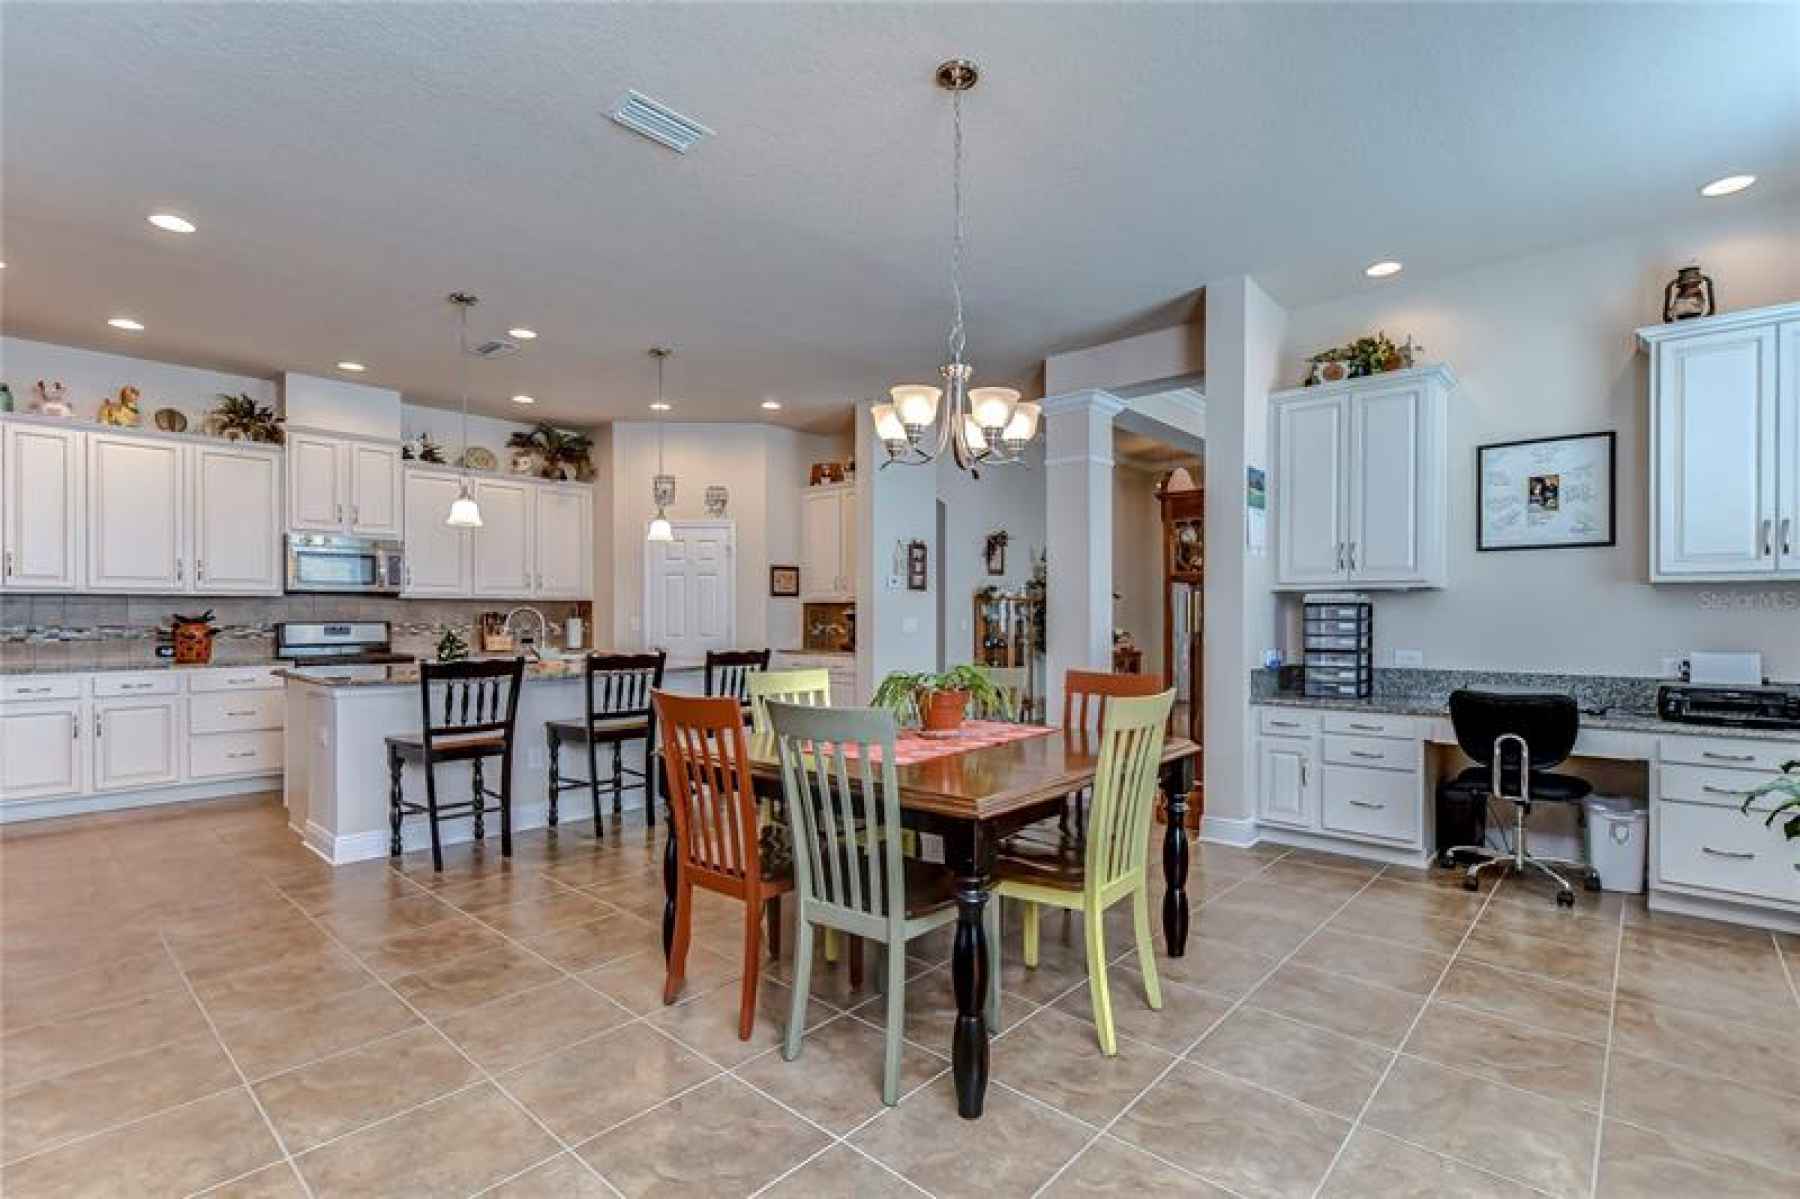 This open floor plan is ideal for any family!